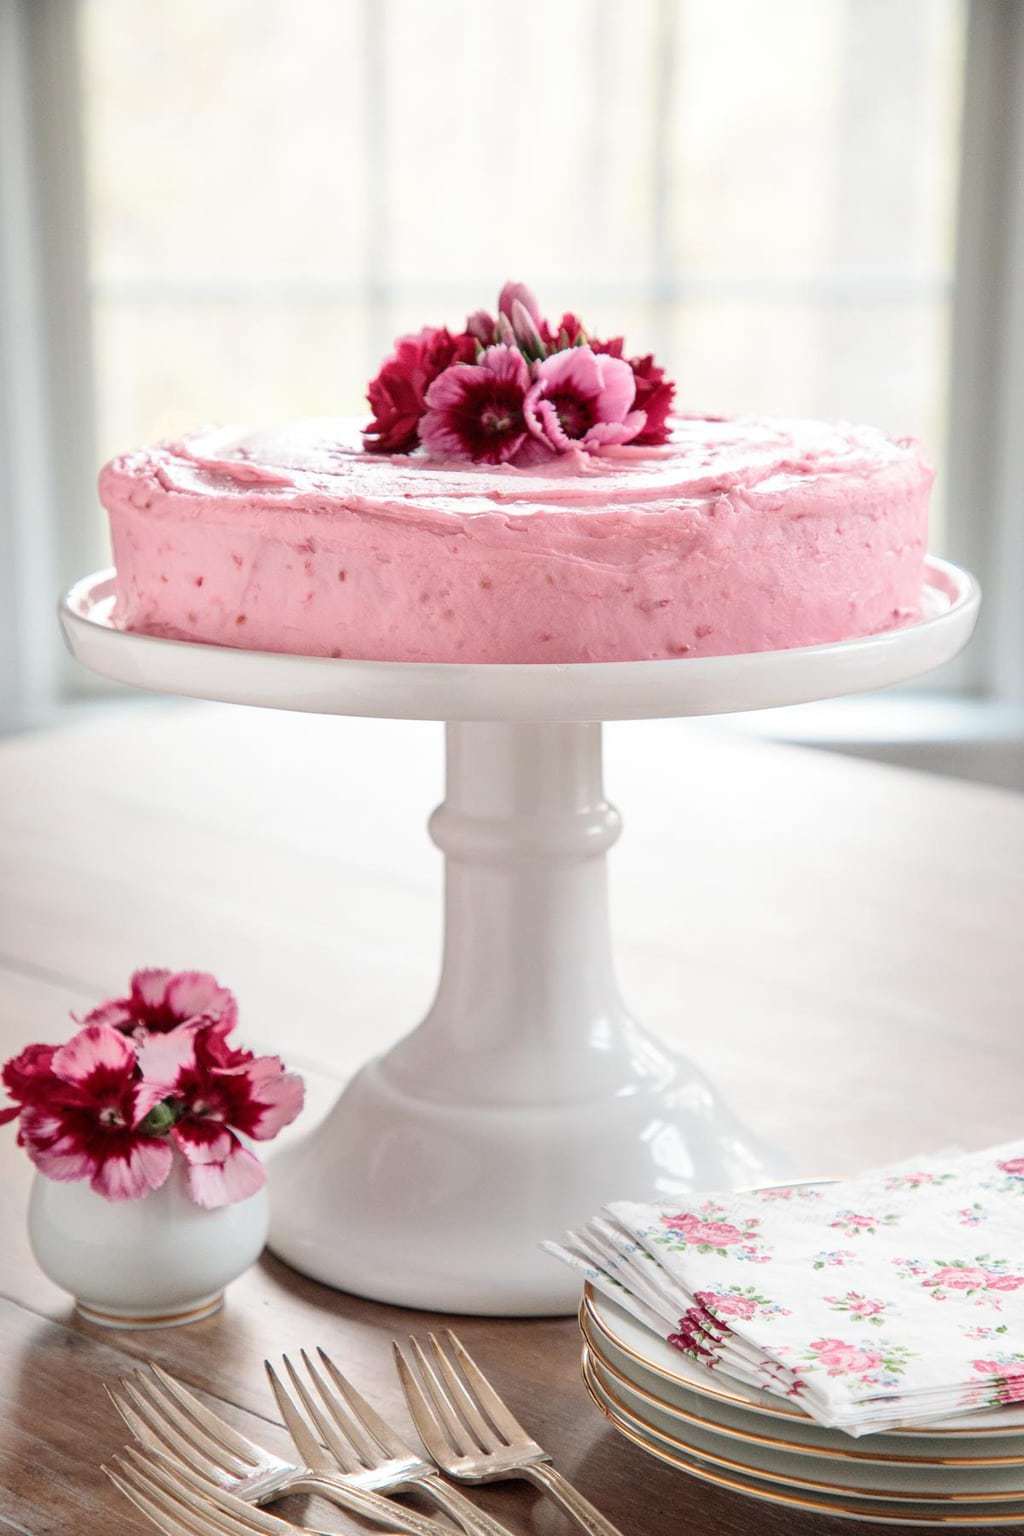 Photo of a One-Bowl Buttermilk Cake with Raspberry Buttercream on a white pedestal cake stand with serving plates, forks, napkins and flowers in the foreground.